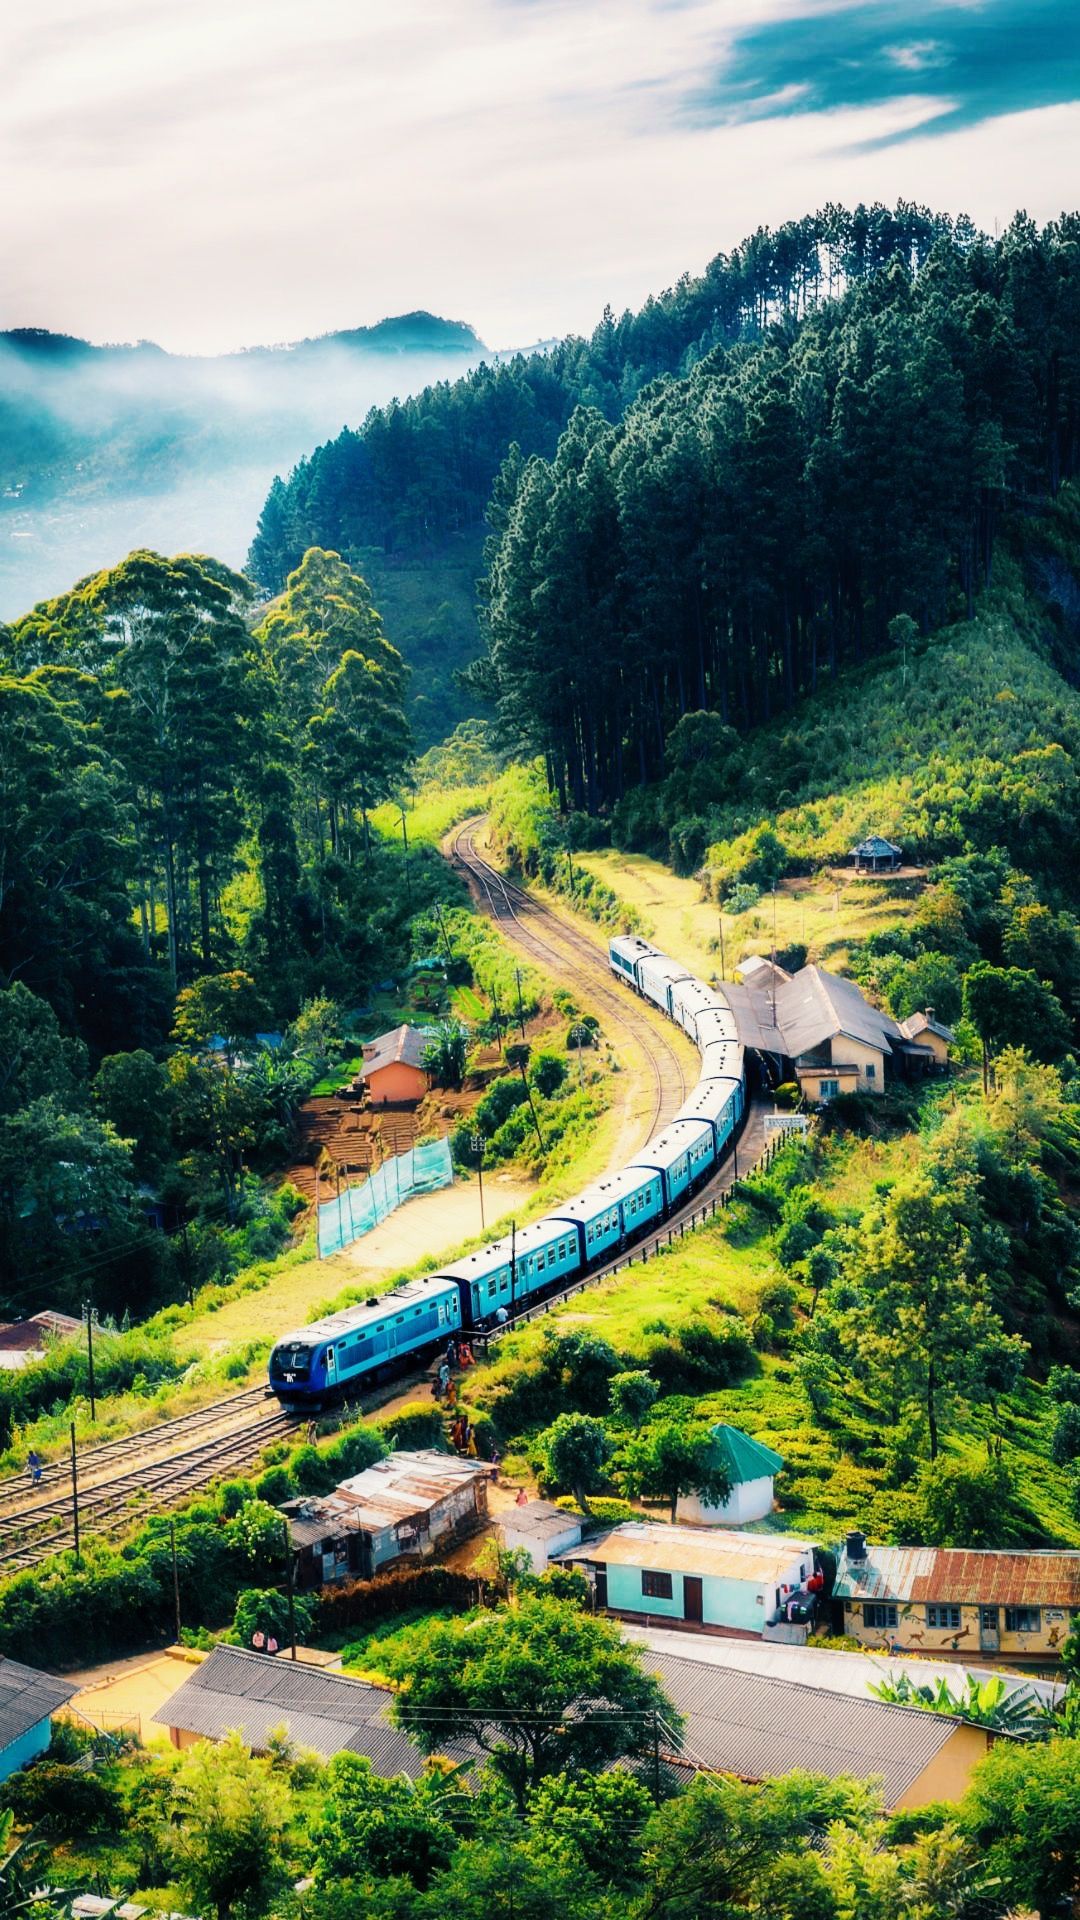 A train traveling down the tracks through some trees - Nature